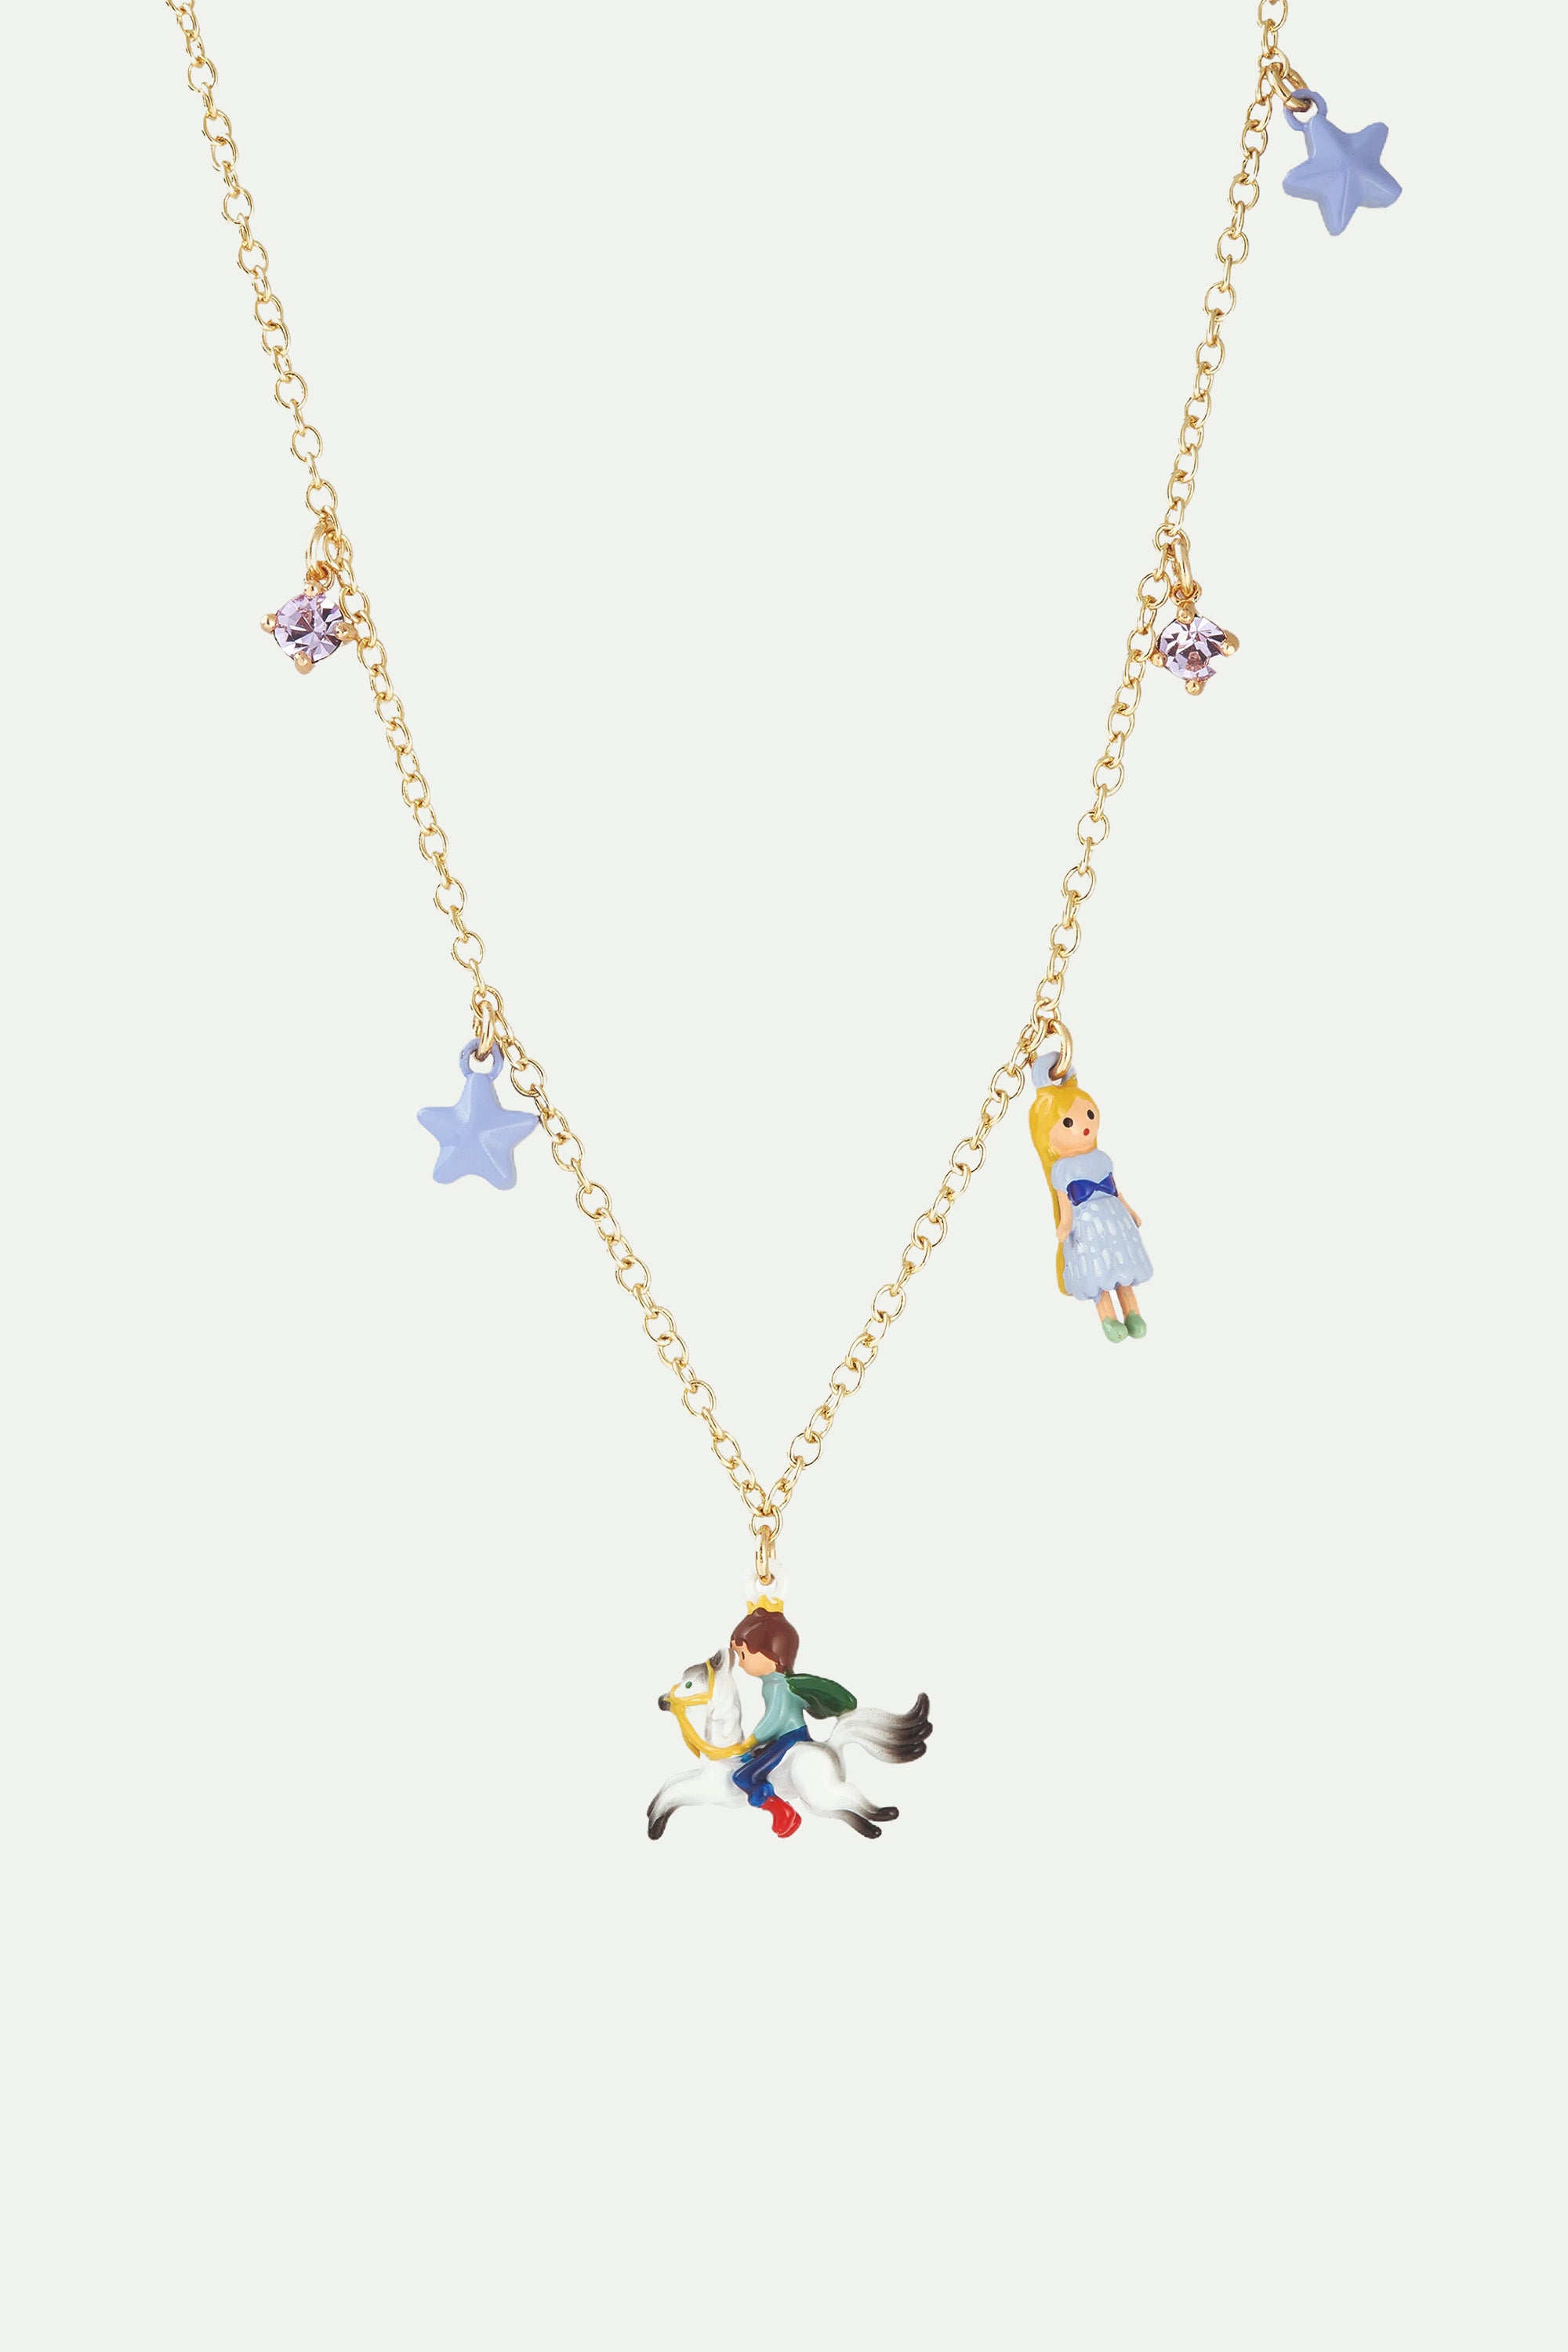 Enchanted hair princess and prince charm necklace